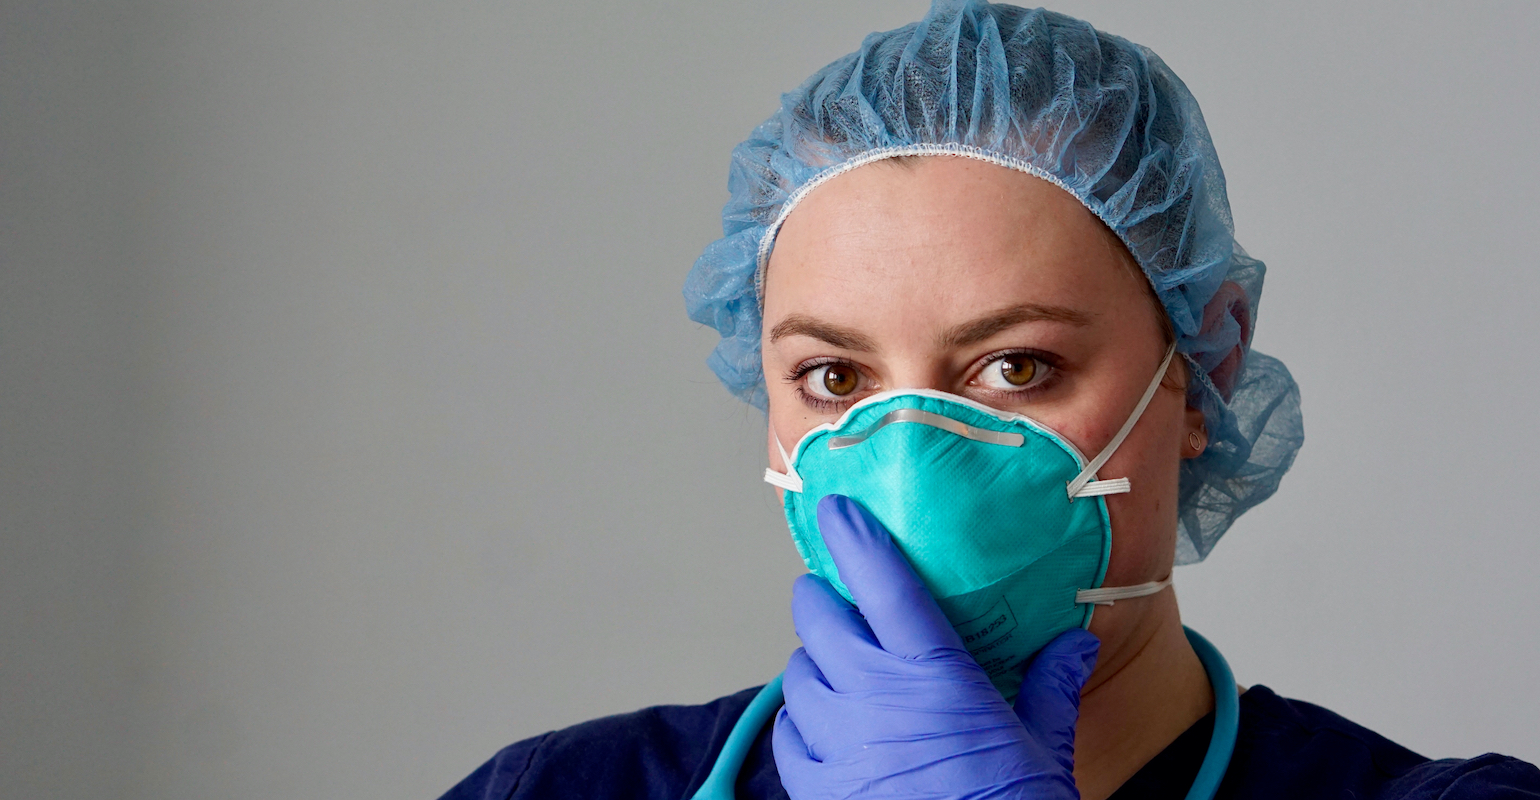 N95 mask shortage leads to innovative solutions. Omnia